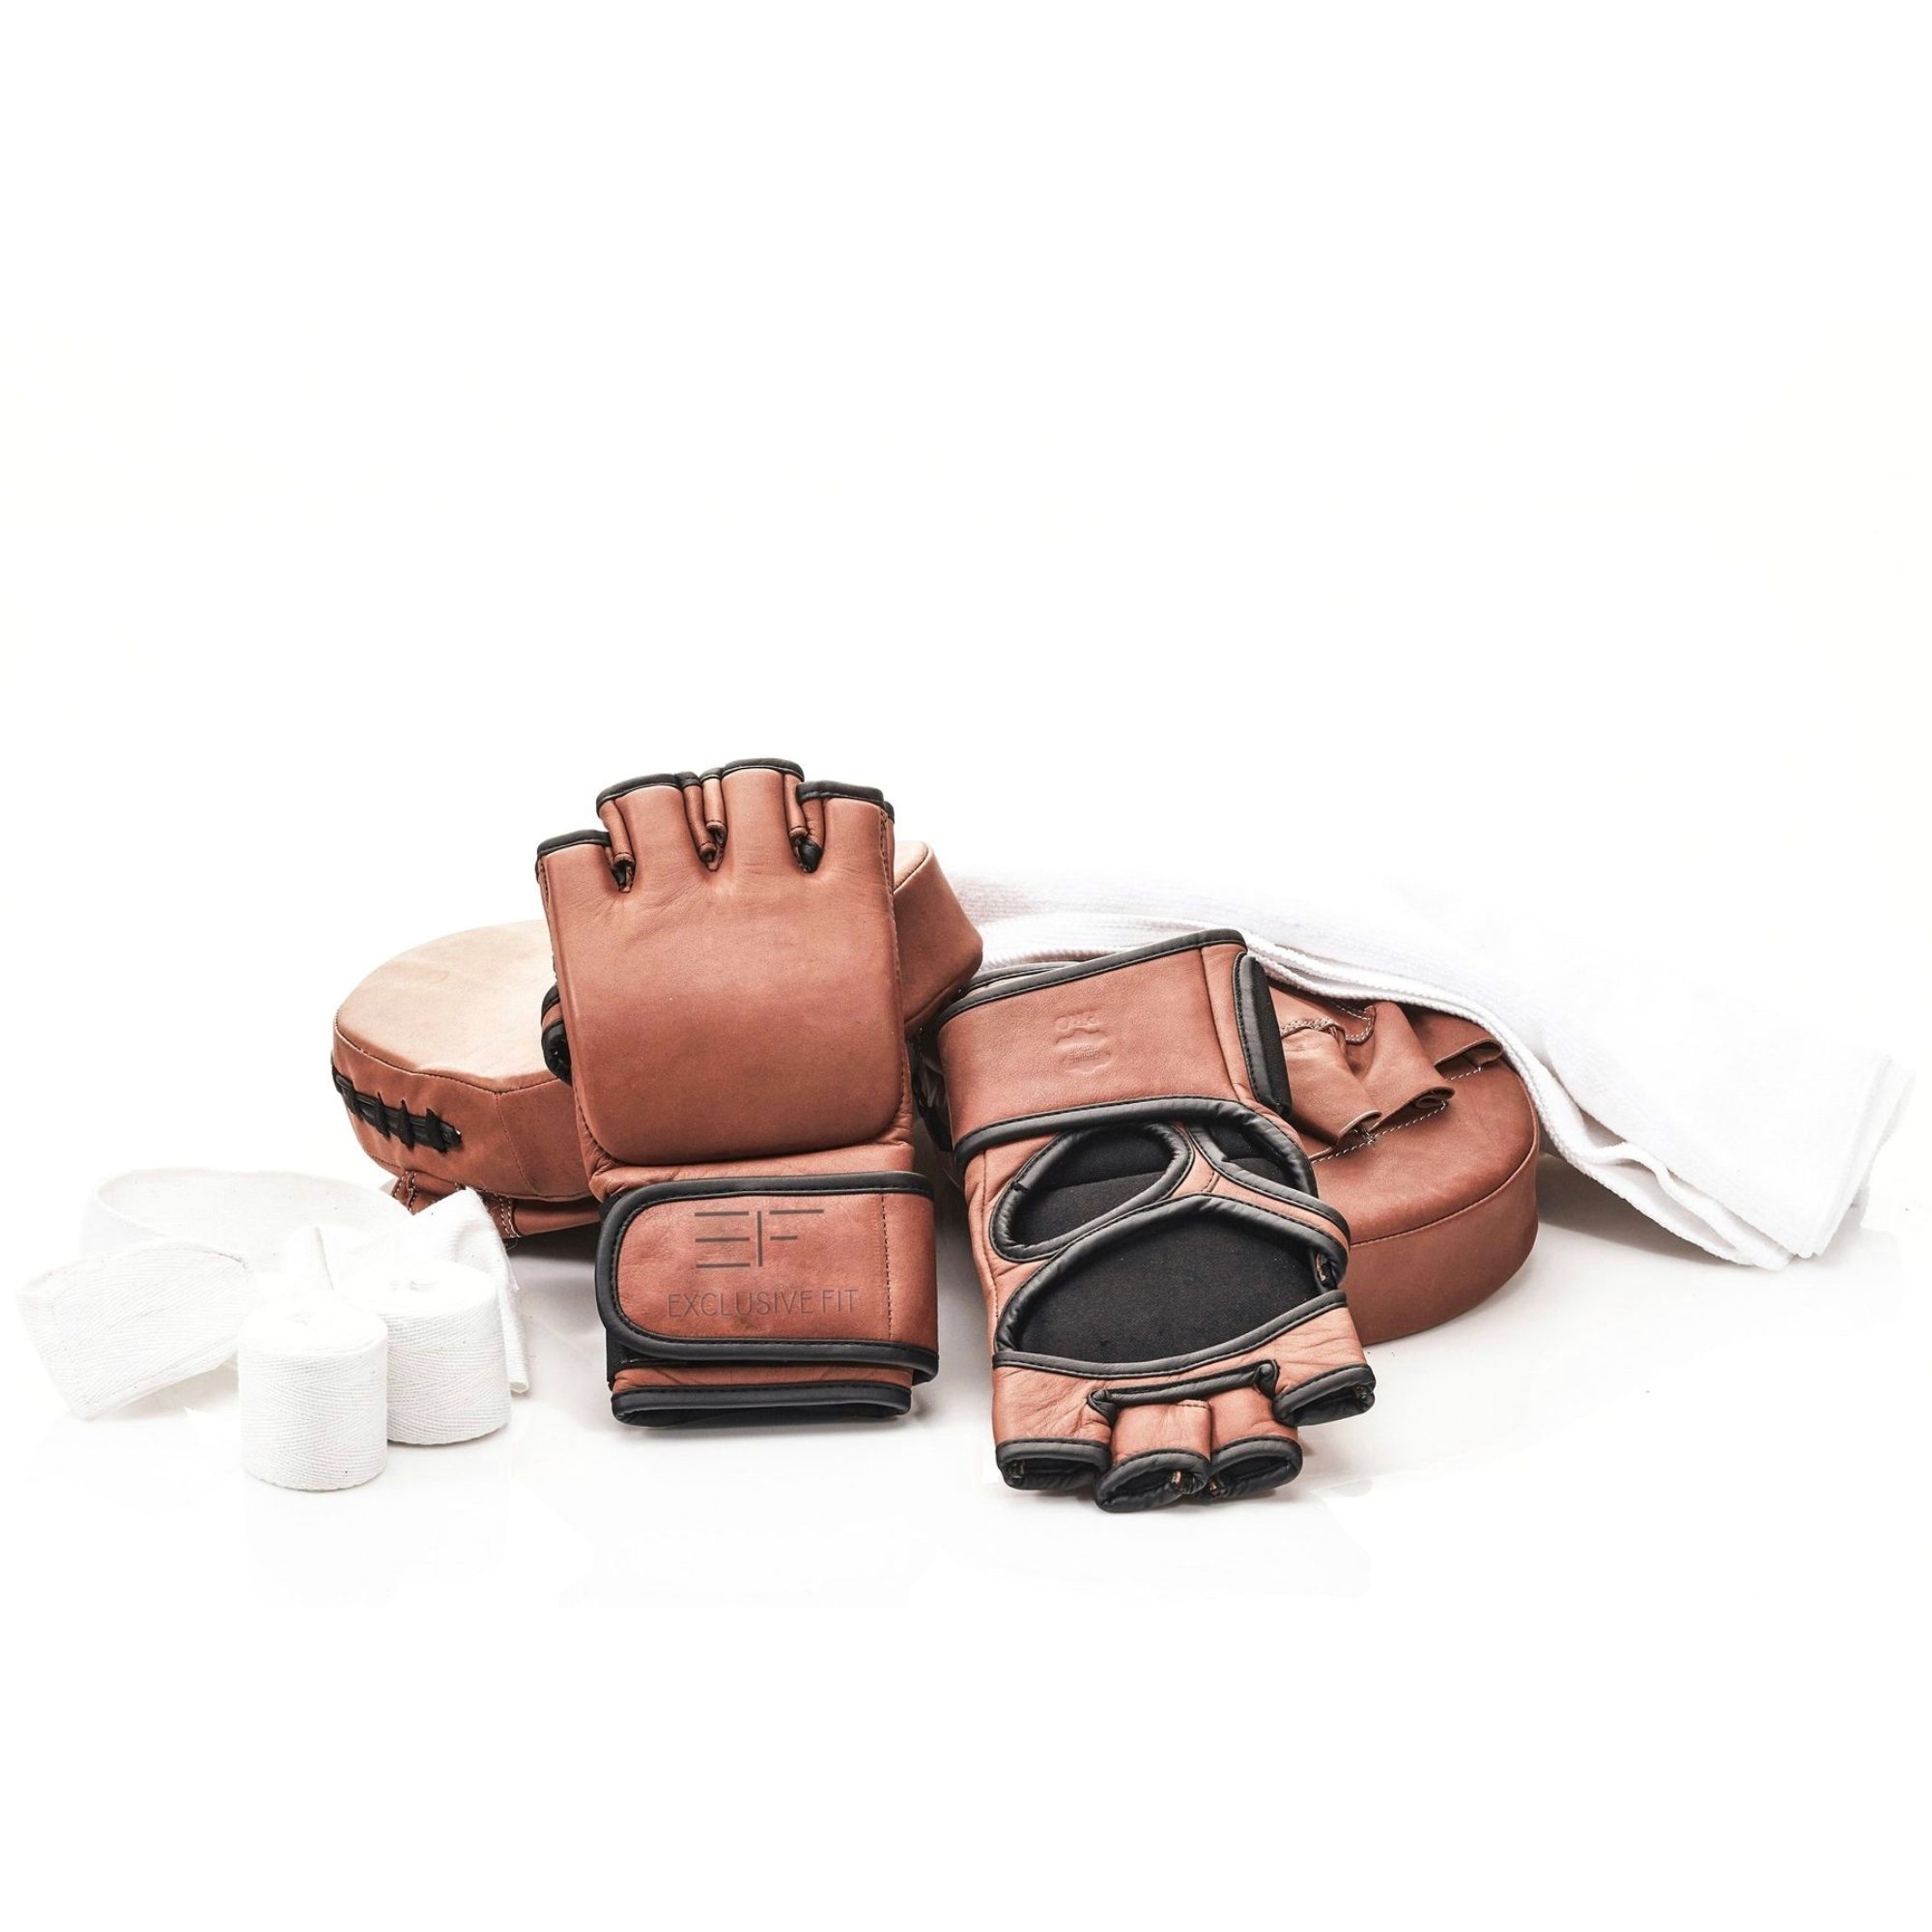 Gants MMA Deluxe Tan – EXCLUSIVE FIT – Agence Exclusive Fit